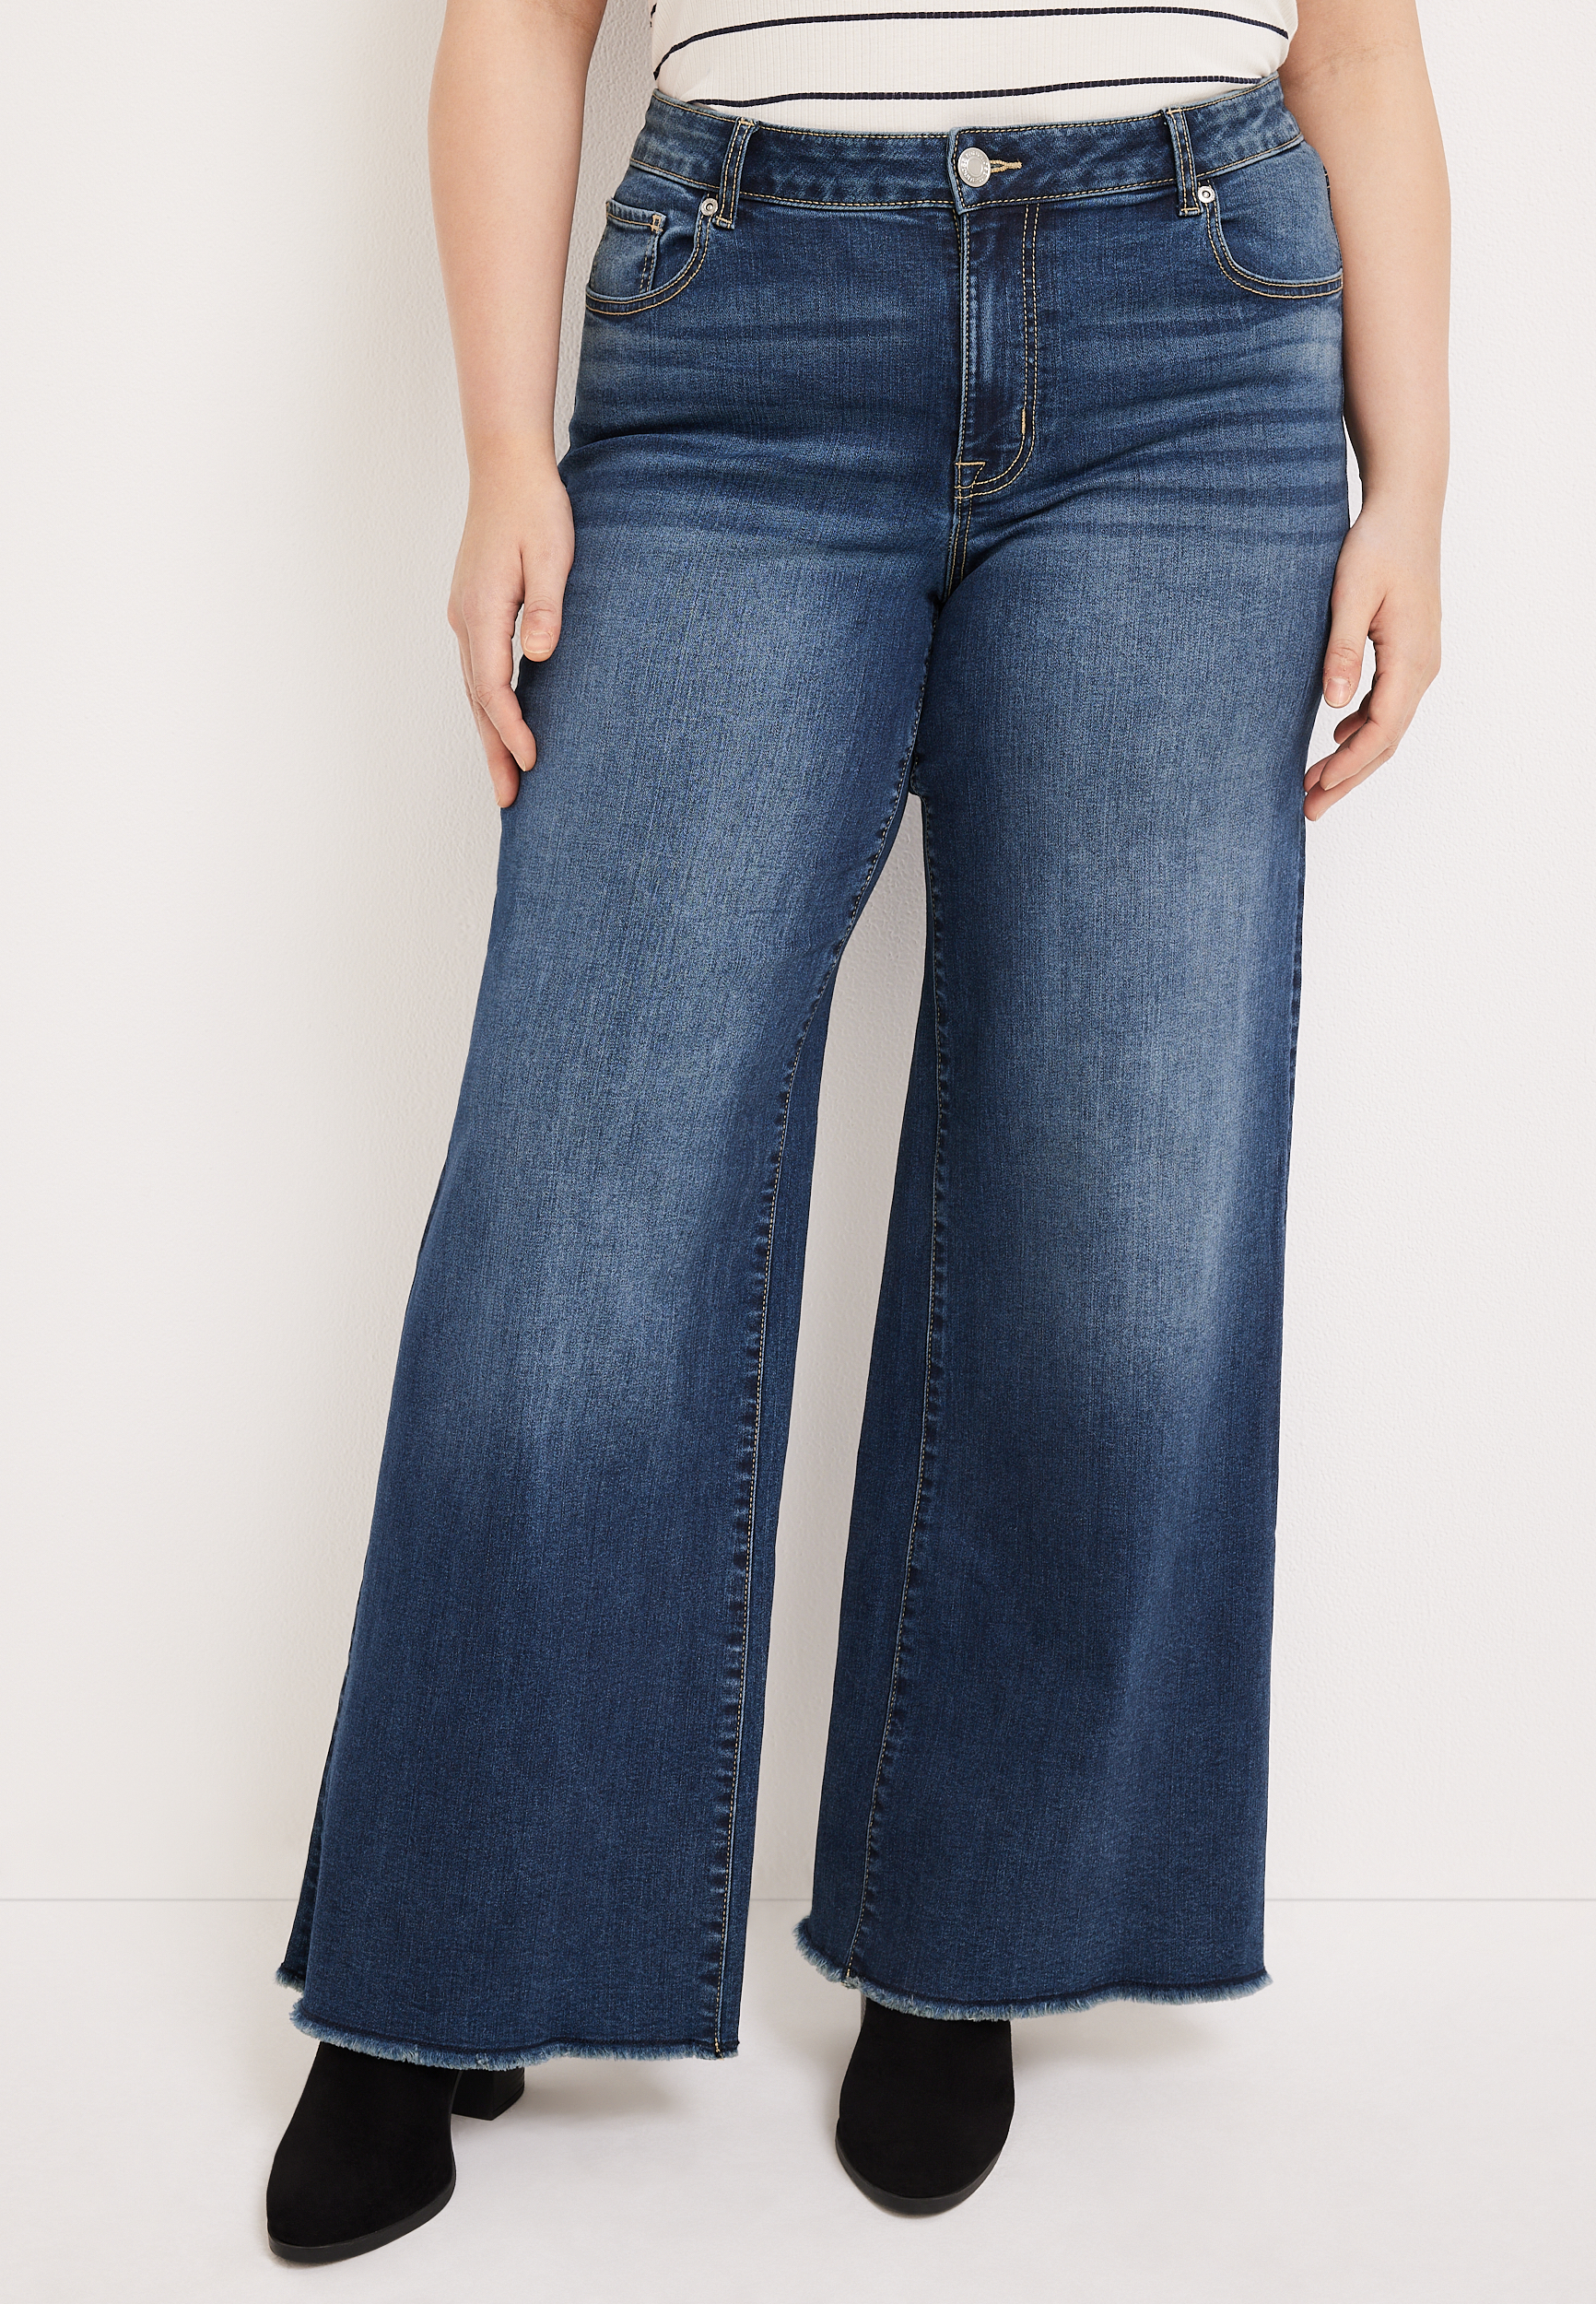 Plus Size jeans by Wide Leg High Rise Frayed Hem Jean maurices